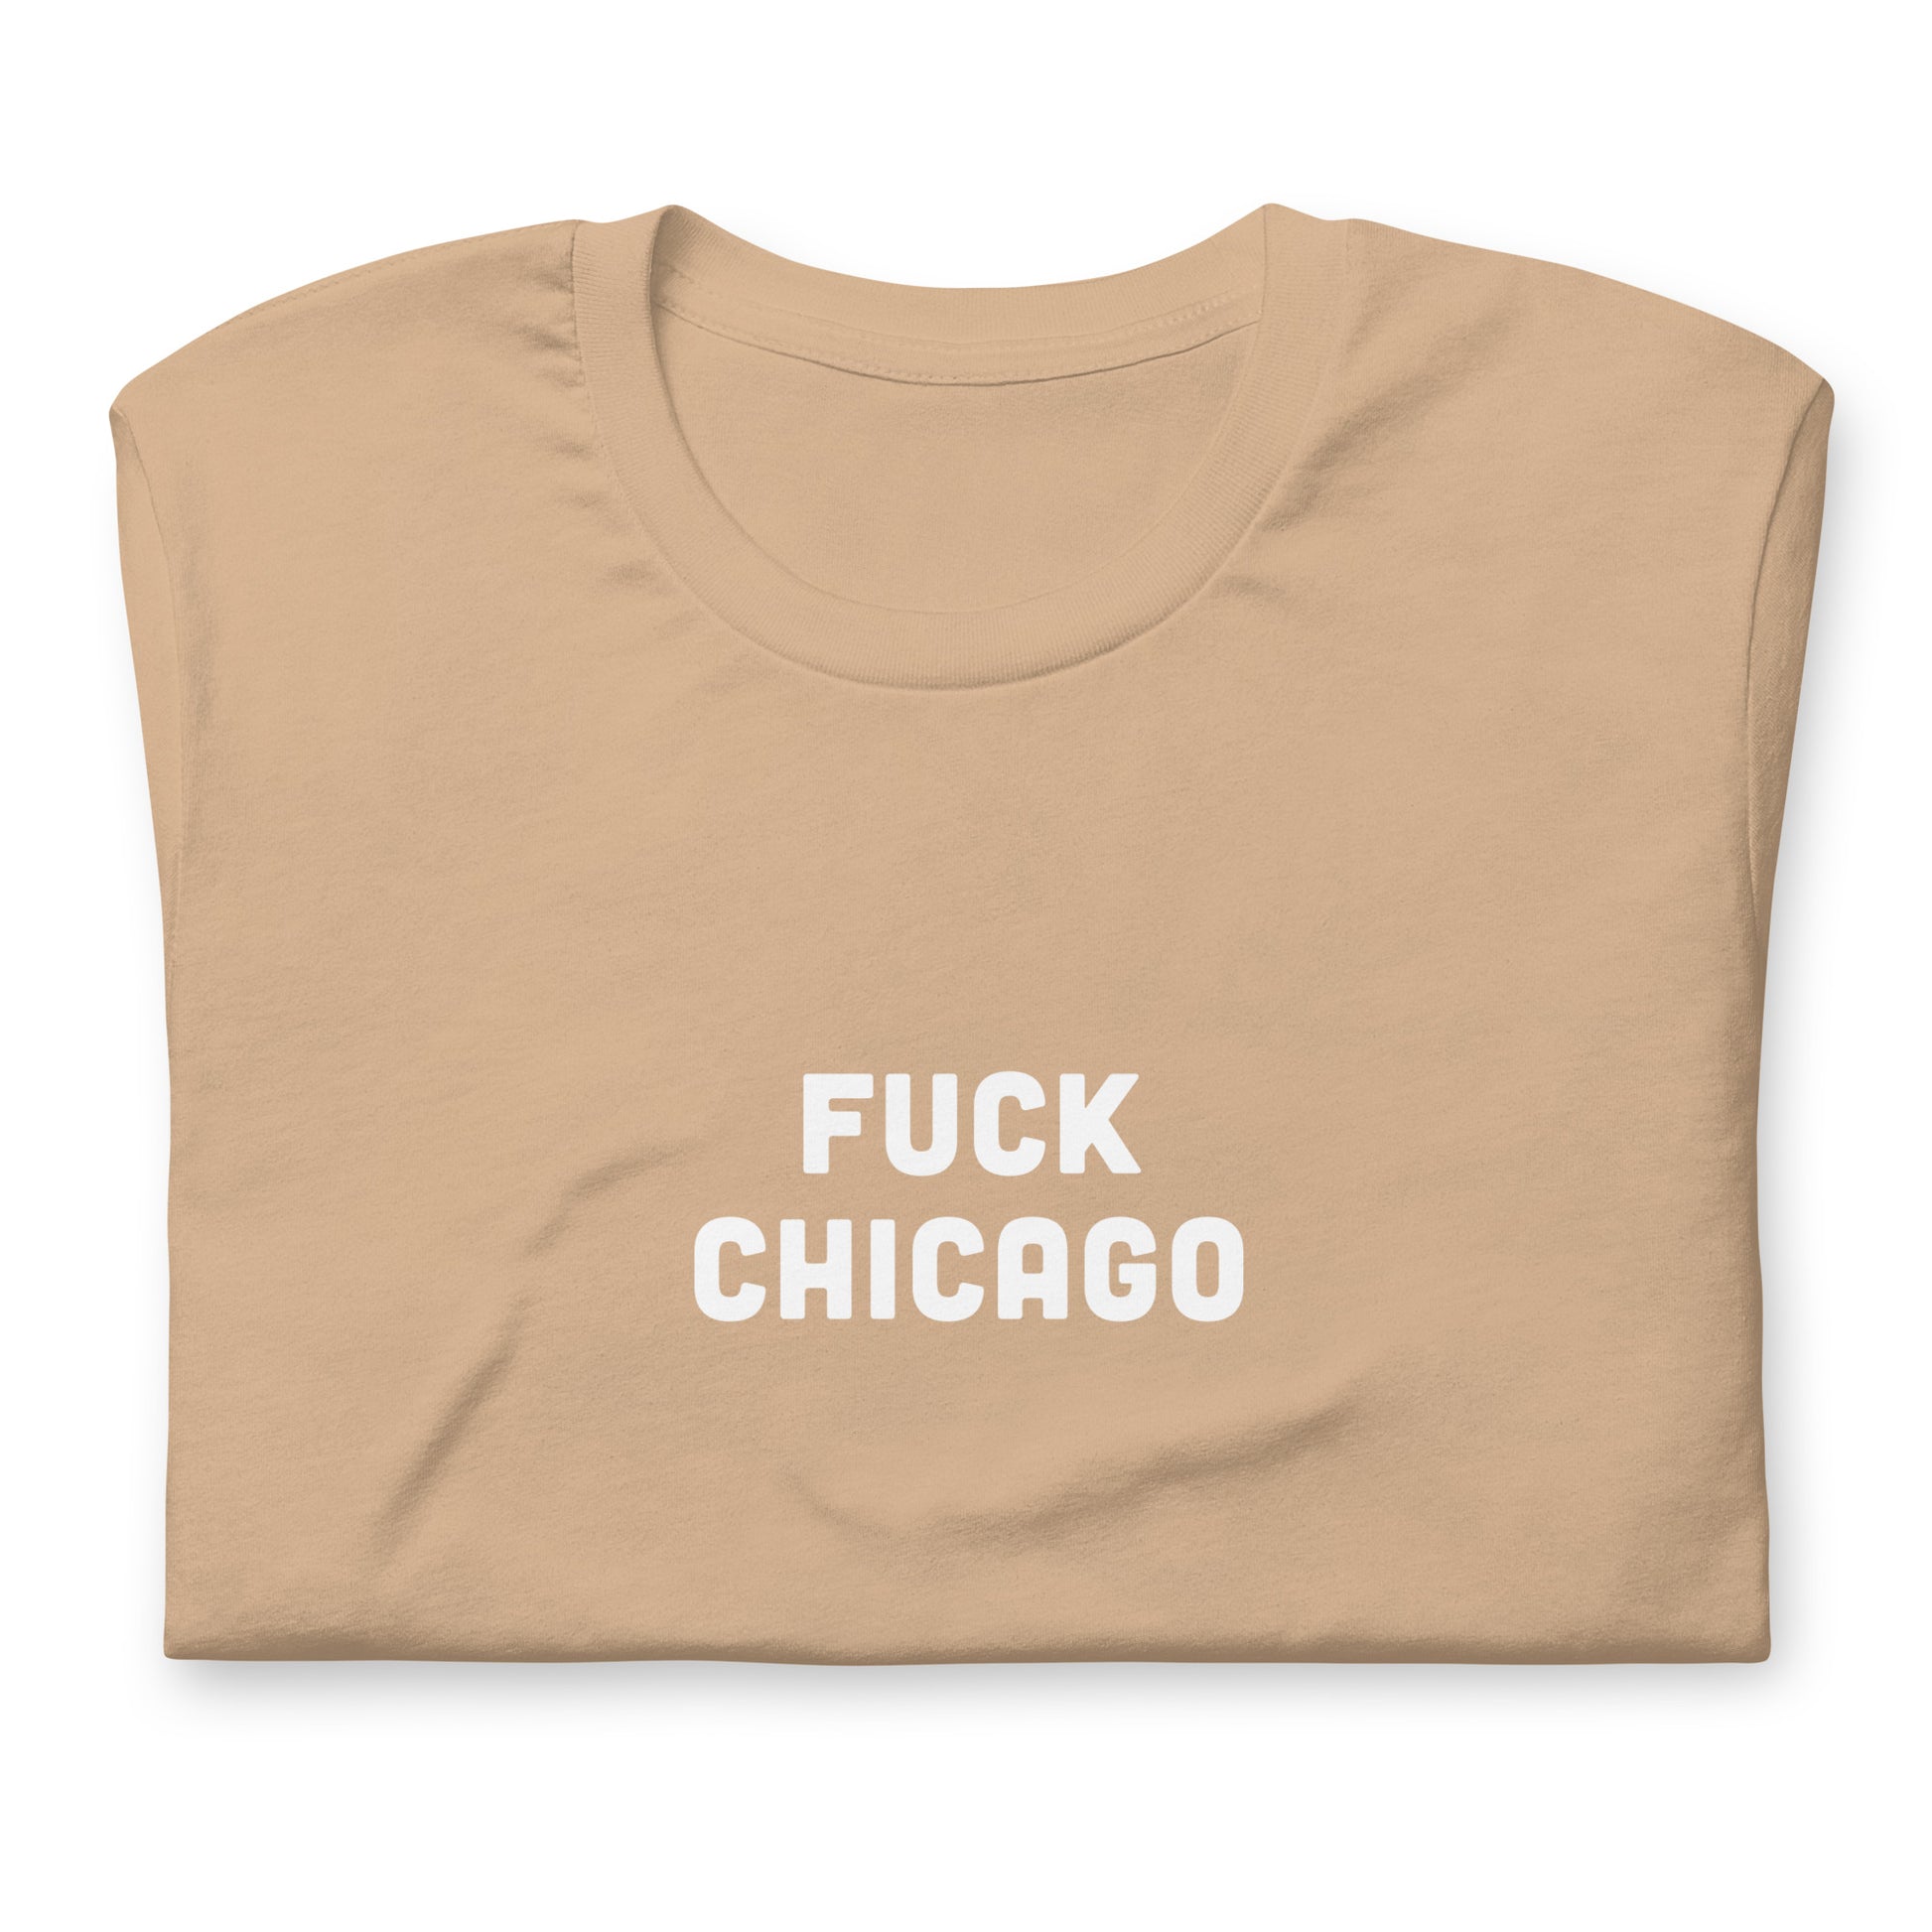 Fuck Chicago T-Shirt Size 2XL Color Forest